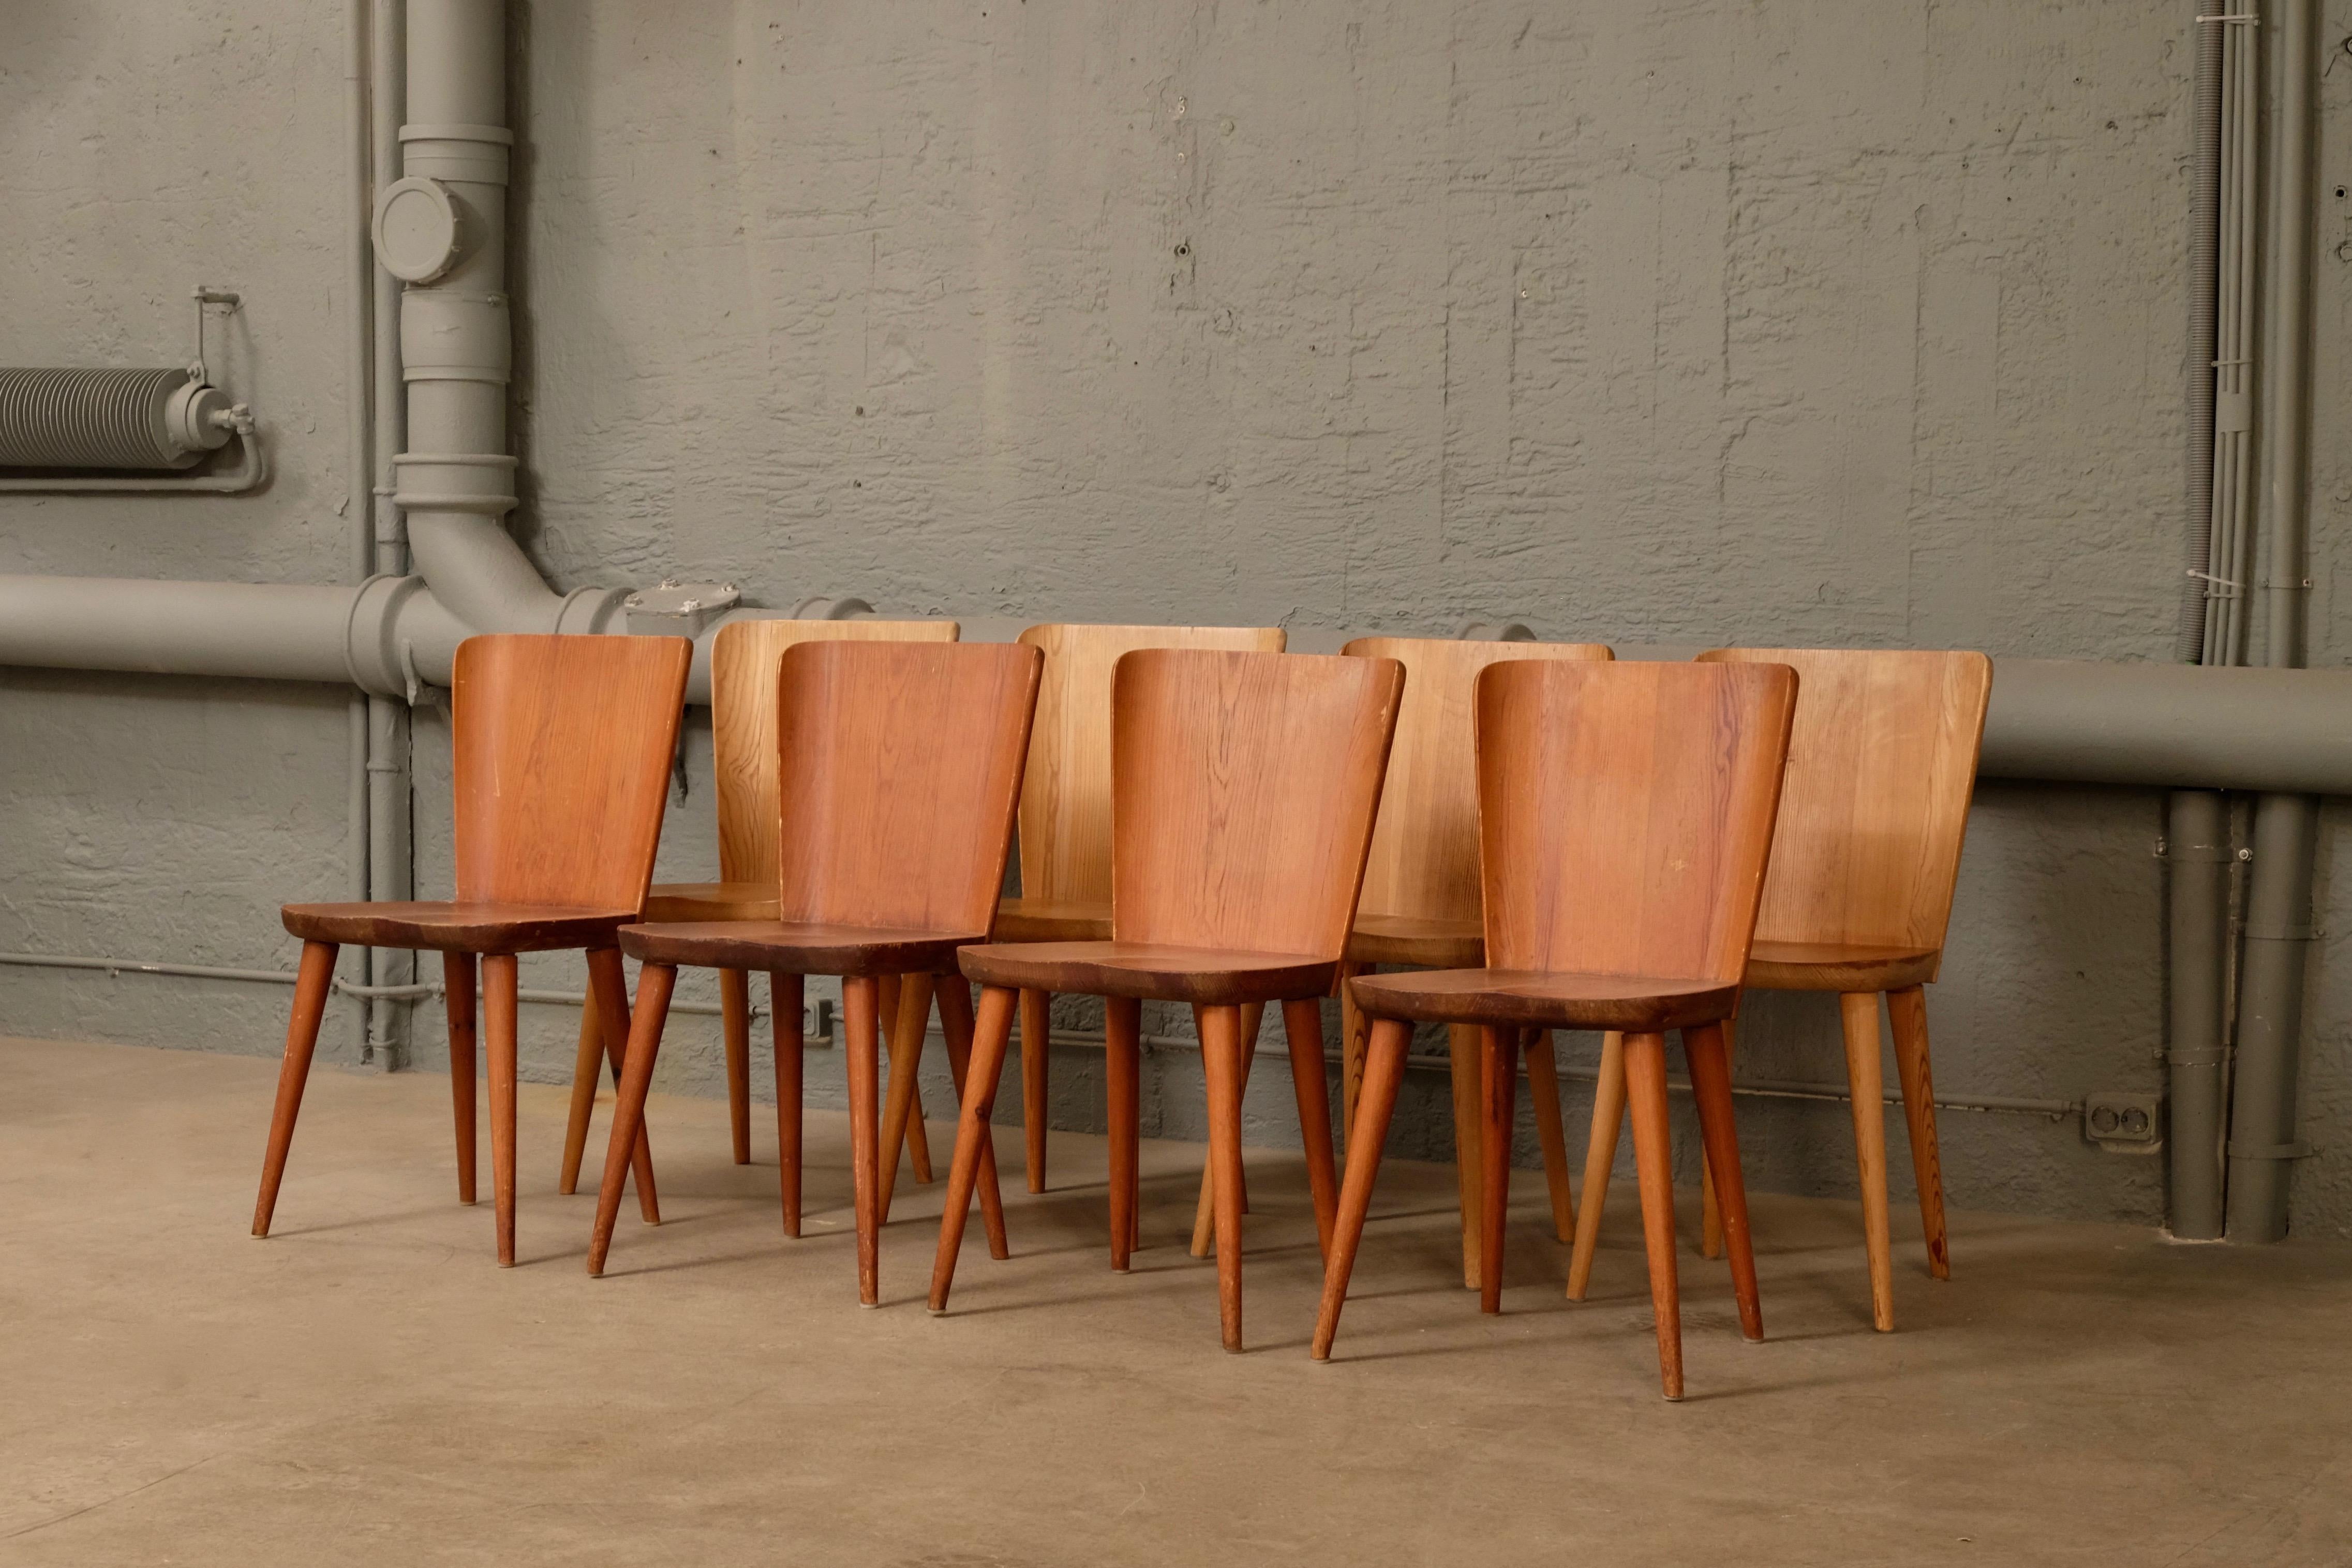 Rare set of 12 available
Produced by Svensk Fur, 1940s
Designed by Göran Malmvall.

€6000 for the set of 12